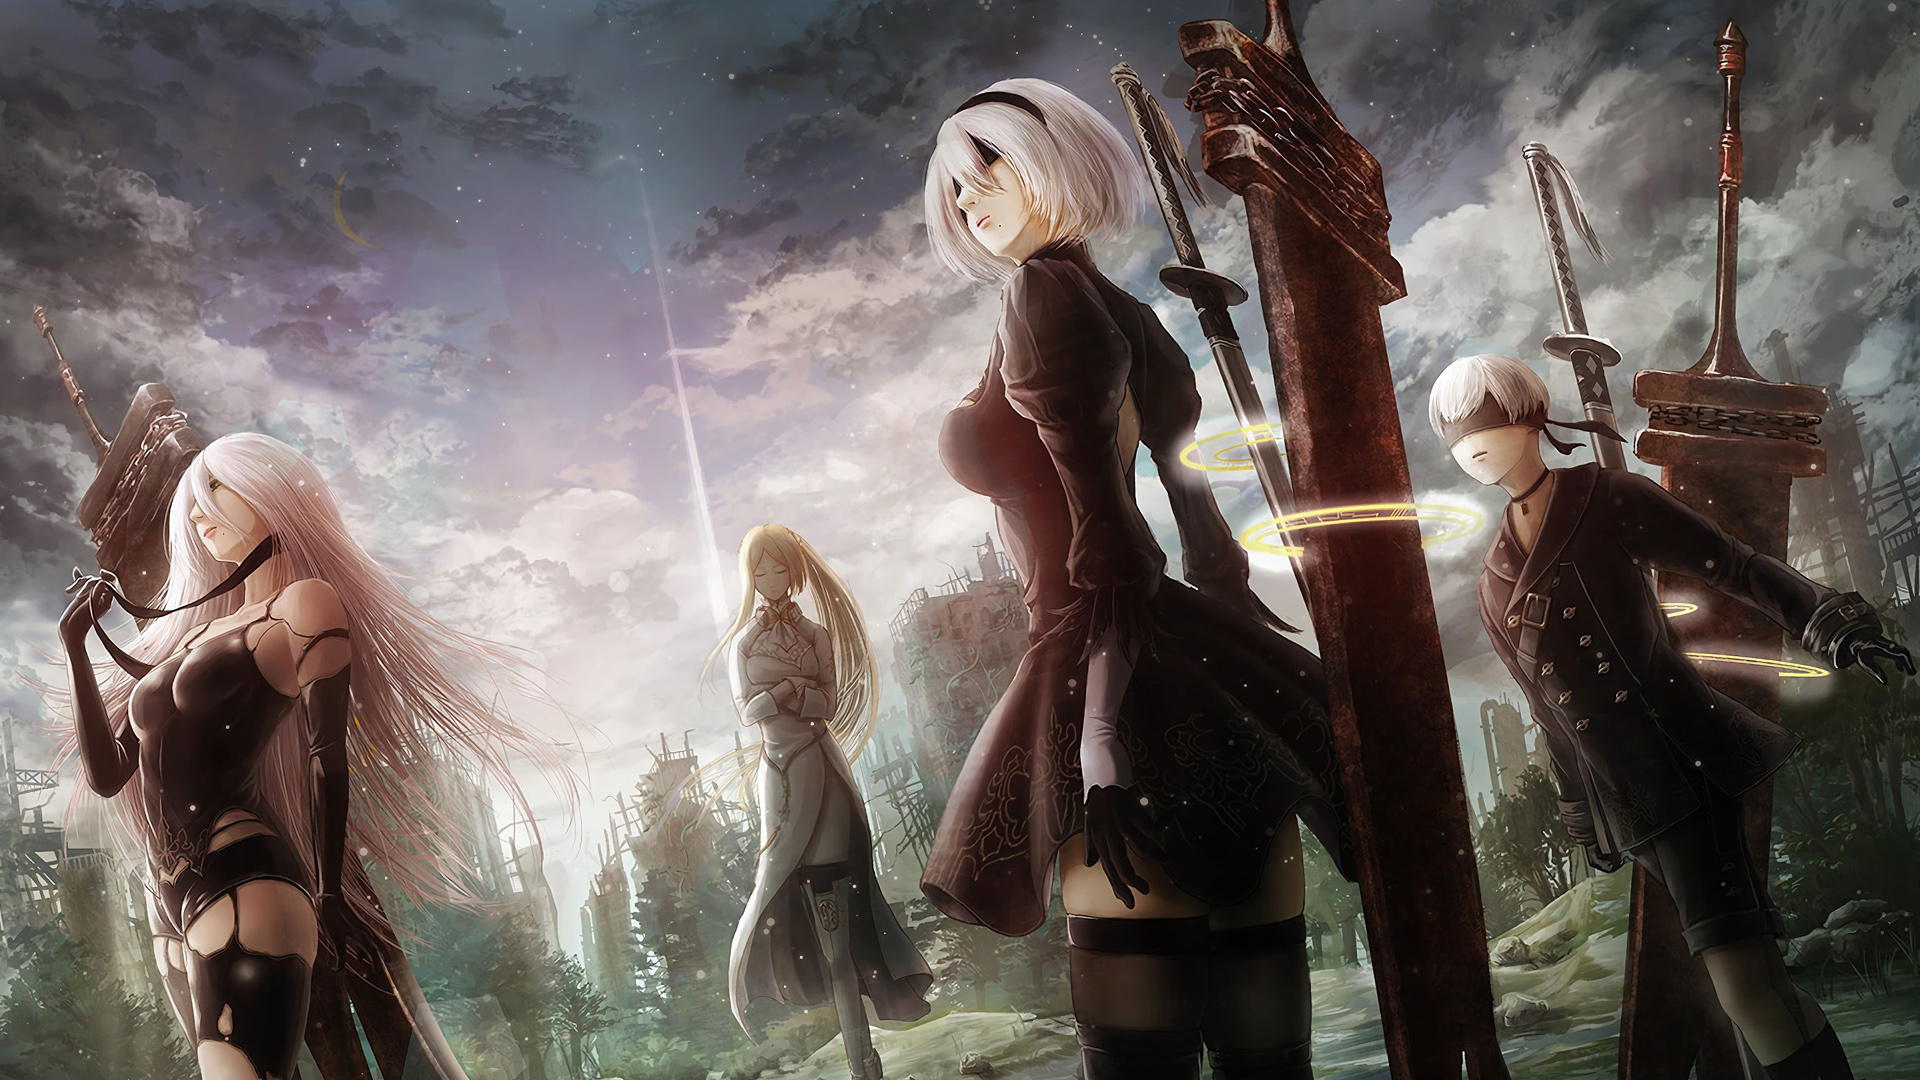 Anime 1920x1080 standing clouds elbow gloves looking away Commander White (Nier: Automata) Nier: Automata blindfold 2B (Nier: Automata) anime 9S (Nier: Automata) A2 (Nier: Automata) weapon long hair anime girls torn clothes stockings